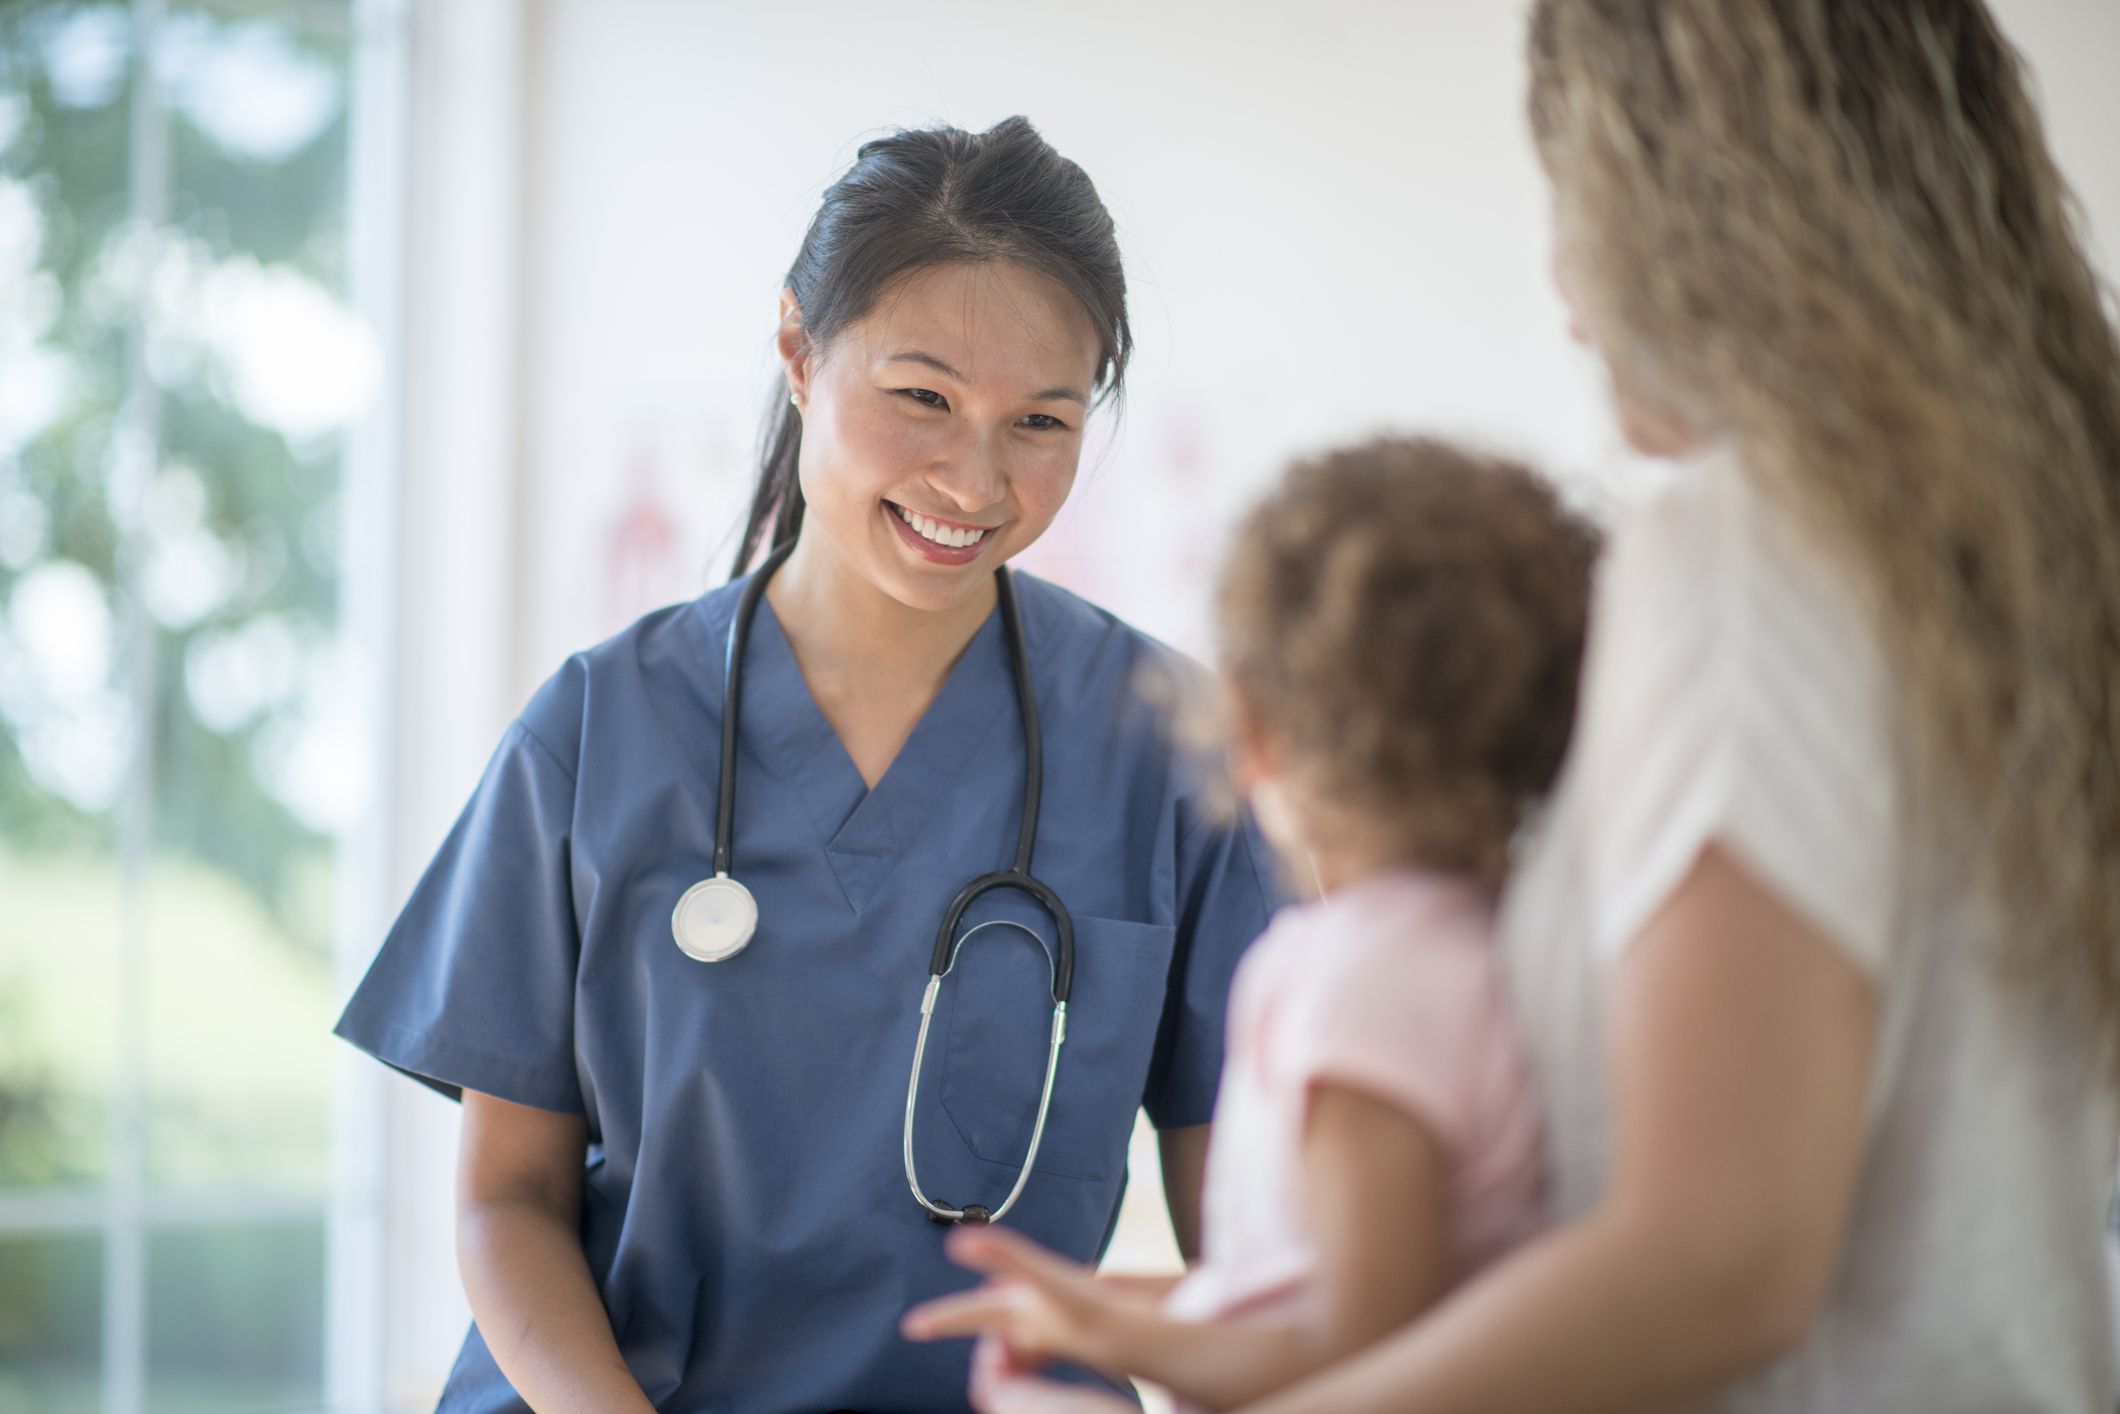 A pediatric nurse caring for a little girl and showing true empathy